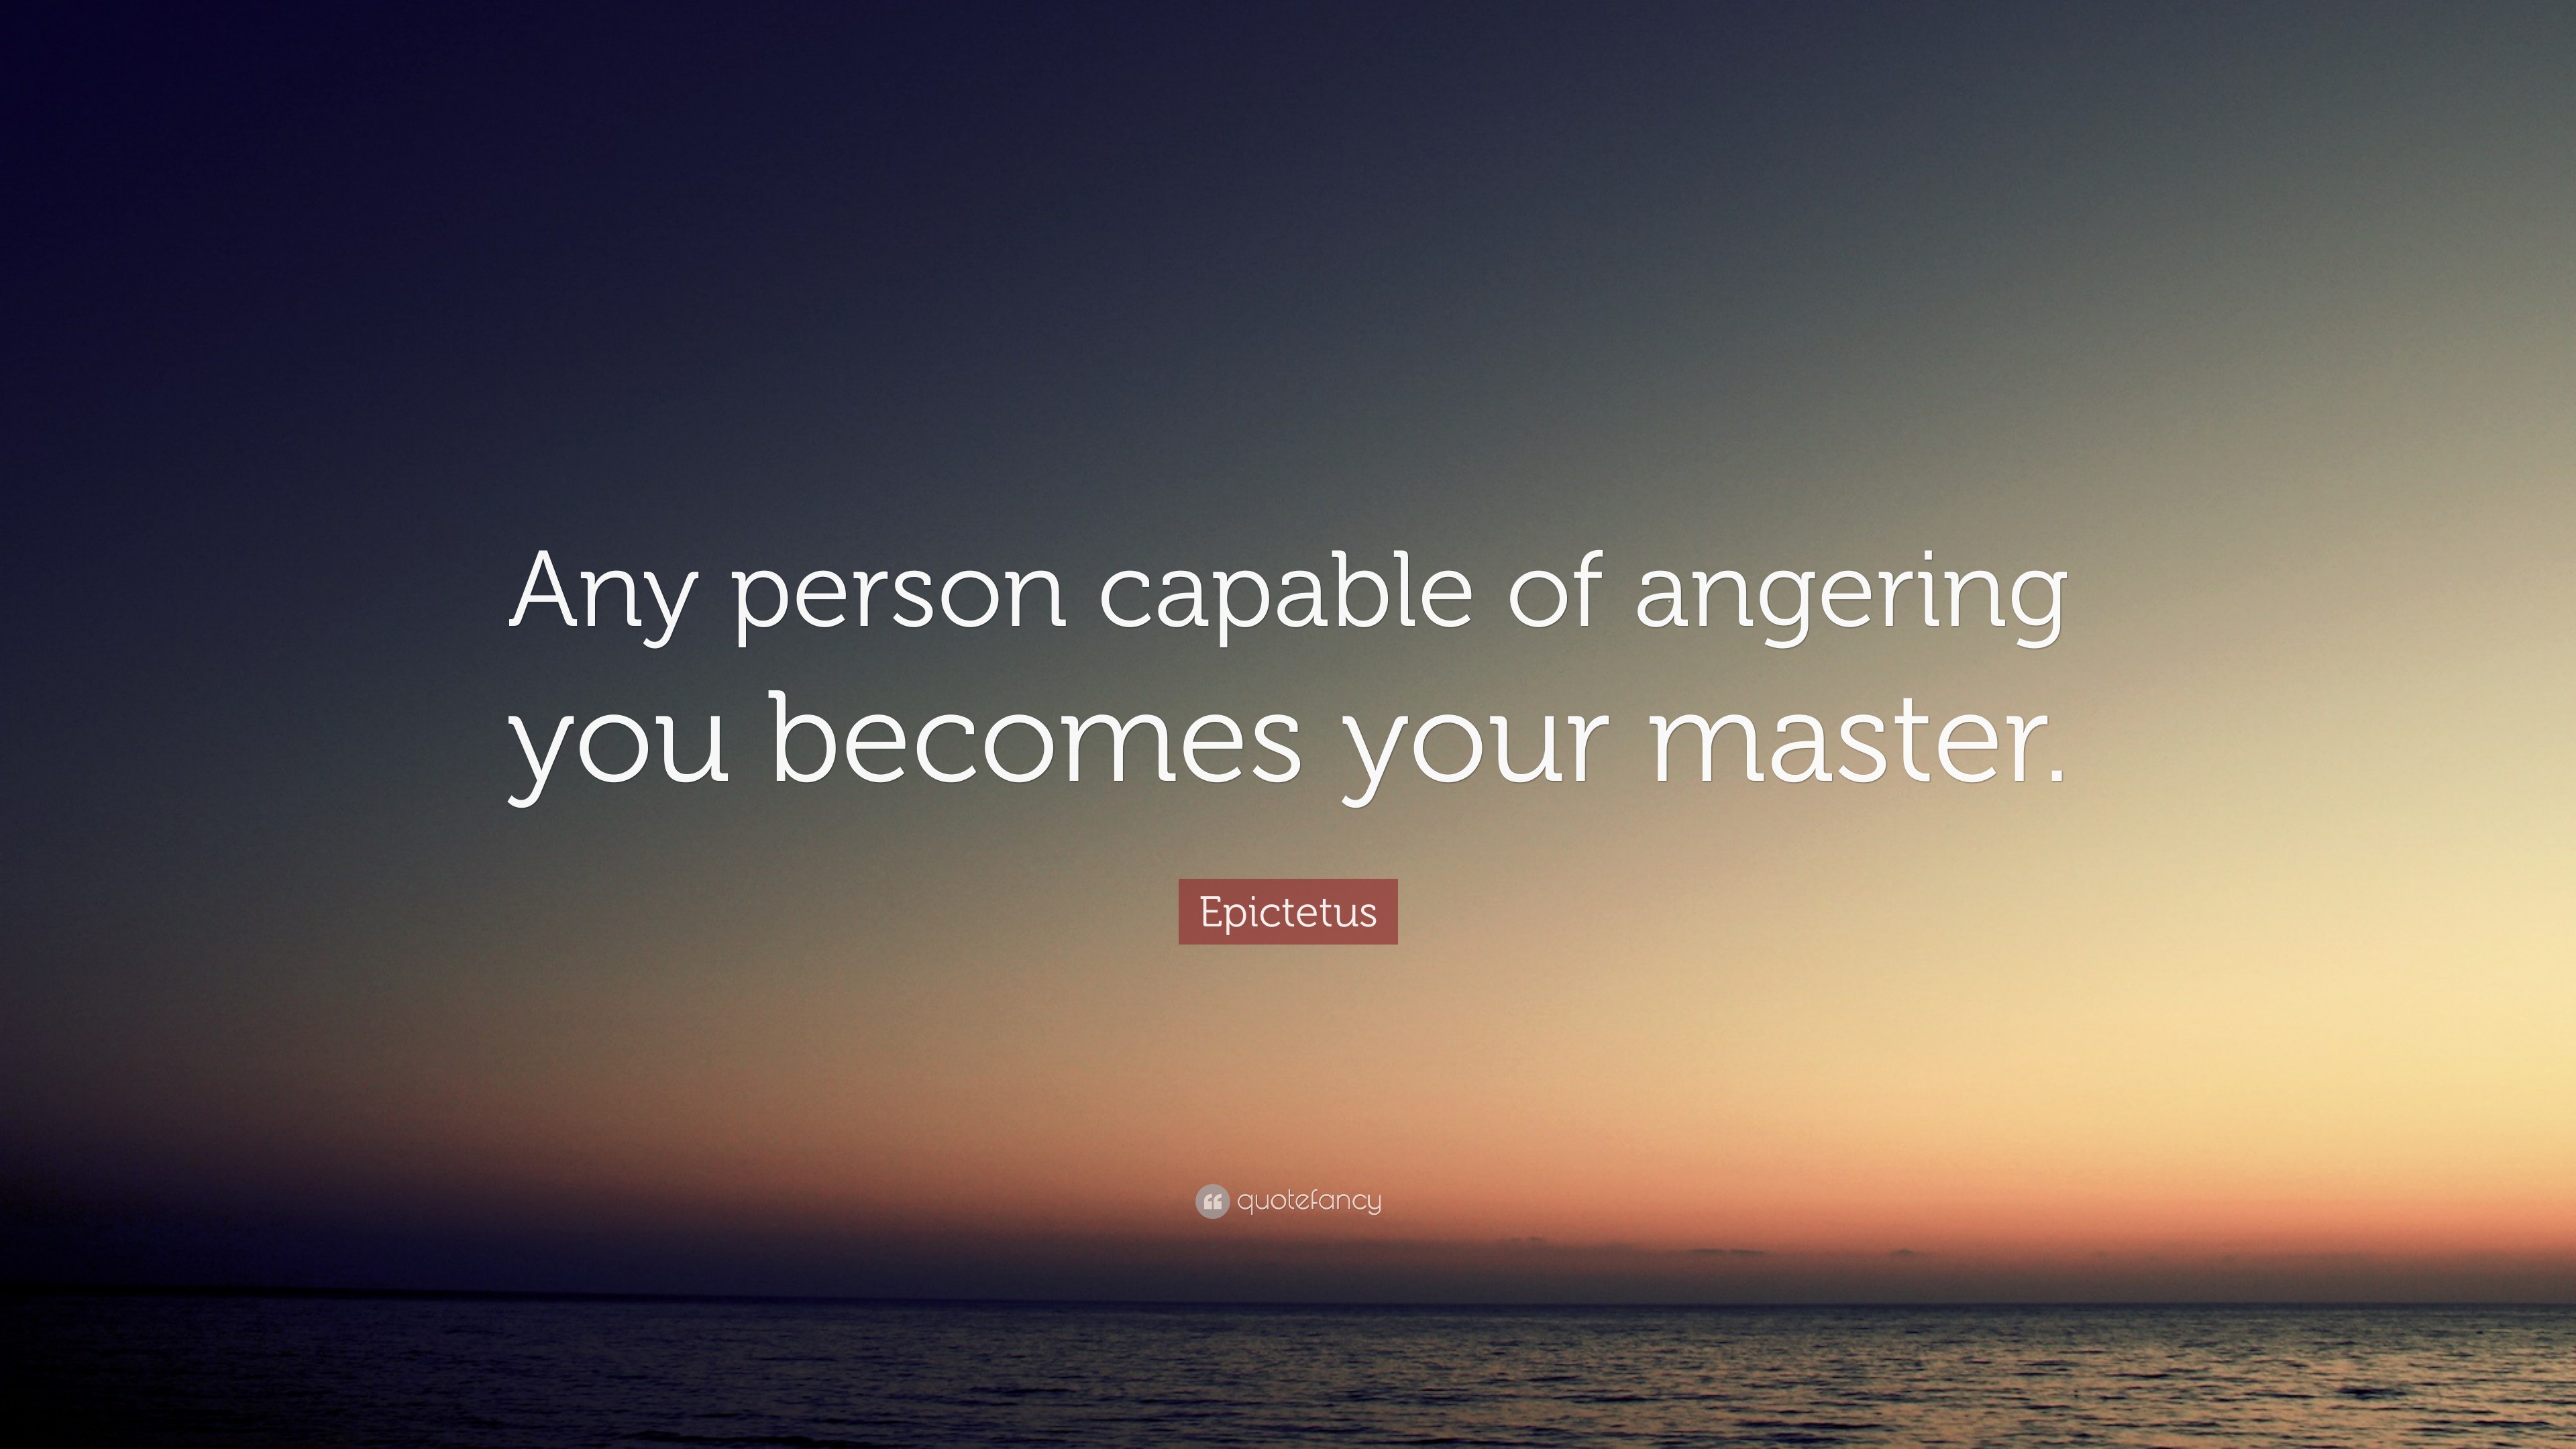 3598169-Epictetus-Quote-Any-person-capable-of-angering-you-becomes-your.jpg